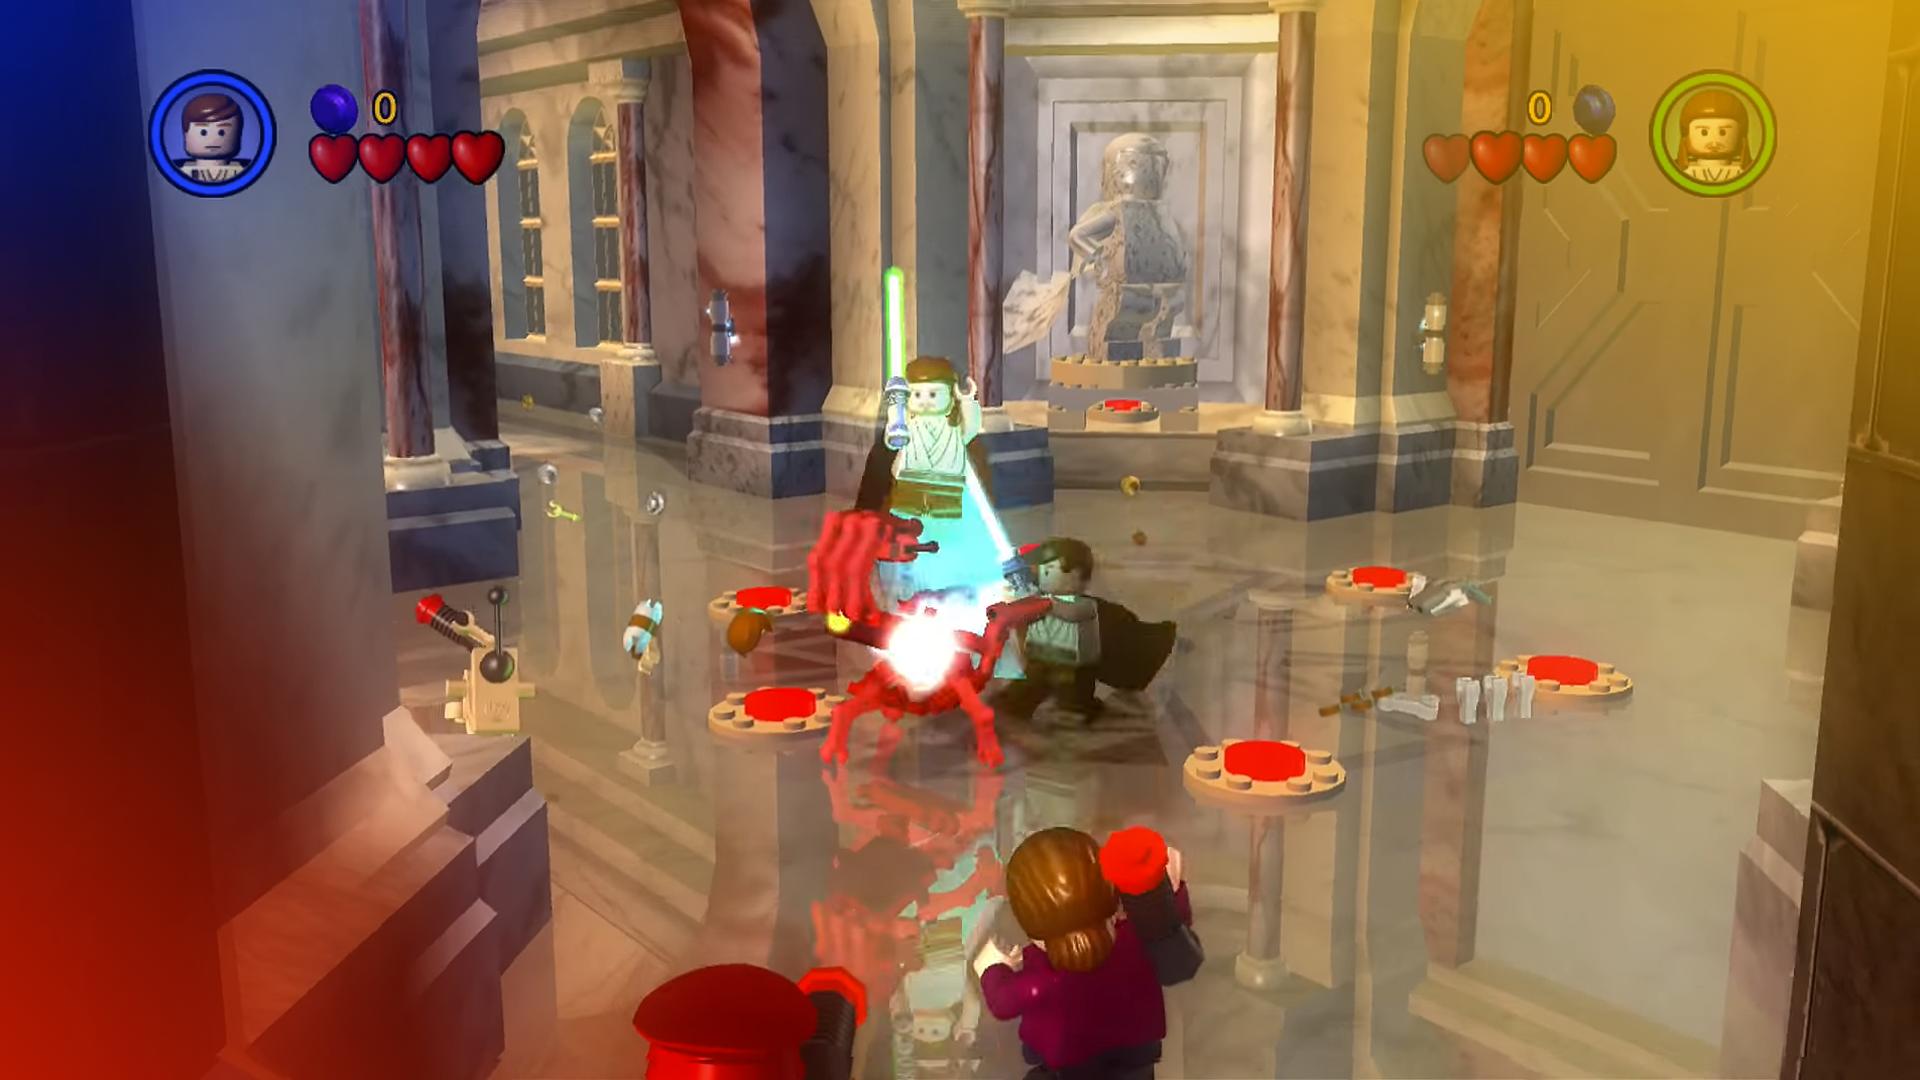 Download do APK de Top LEGO Star Wars TCS Guide para Android